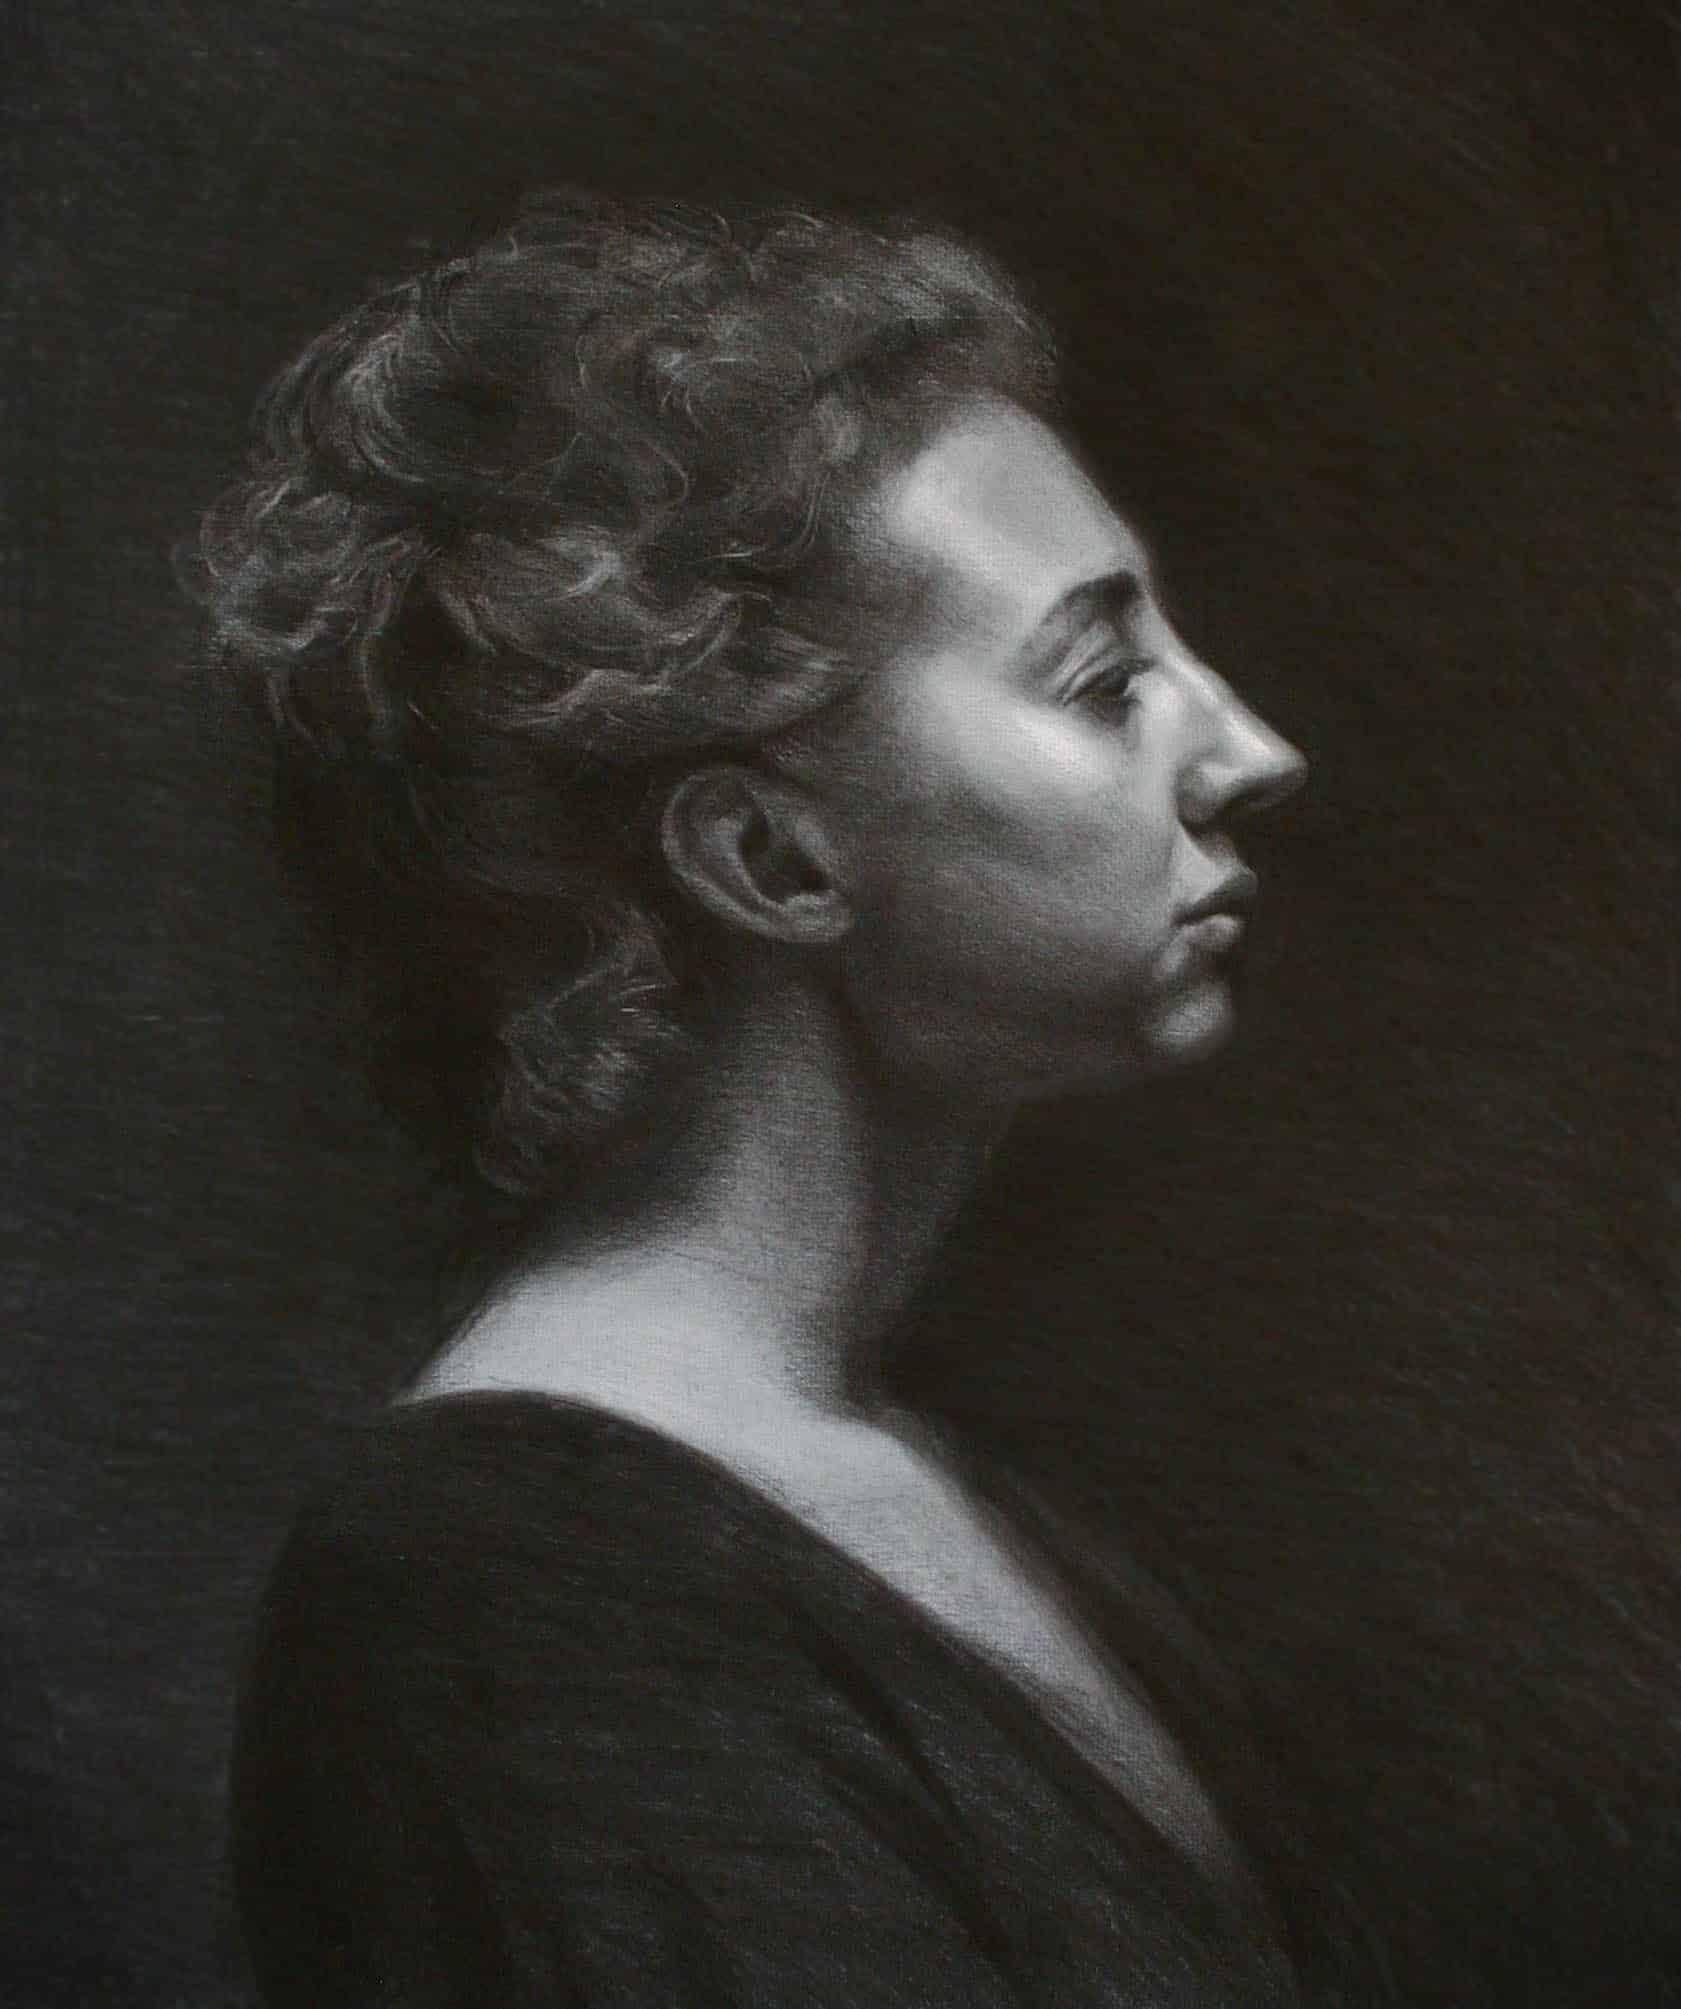 Gala Gilan, "Claudia", Charcoal and white chalk on toned paper, 50 X 60 cm, 2013